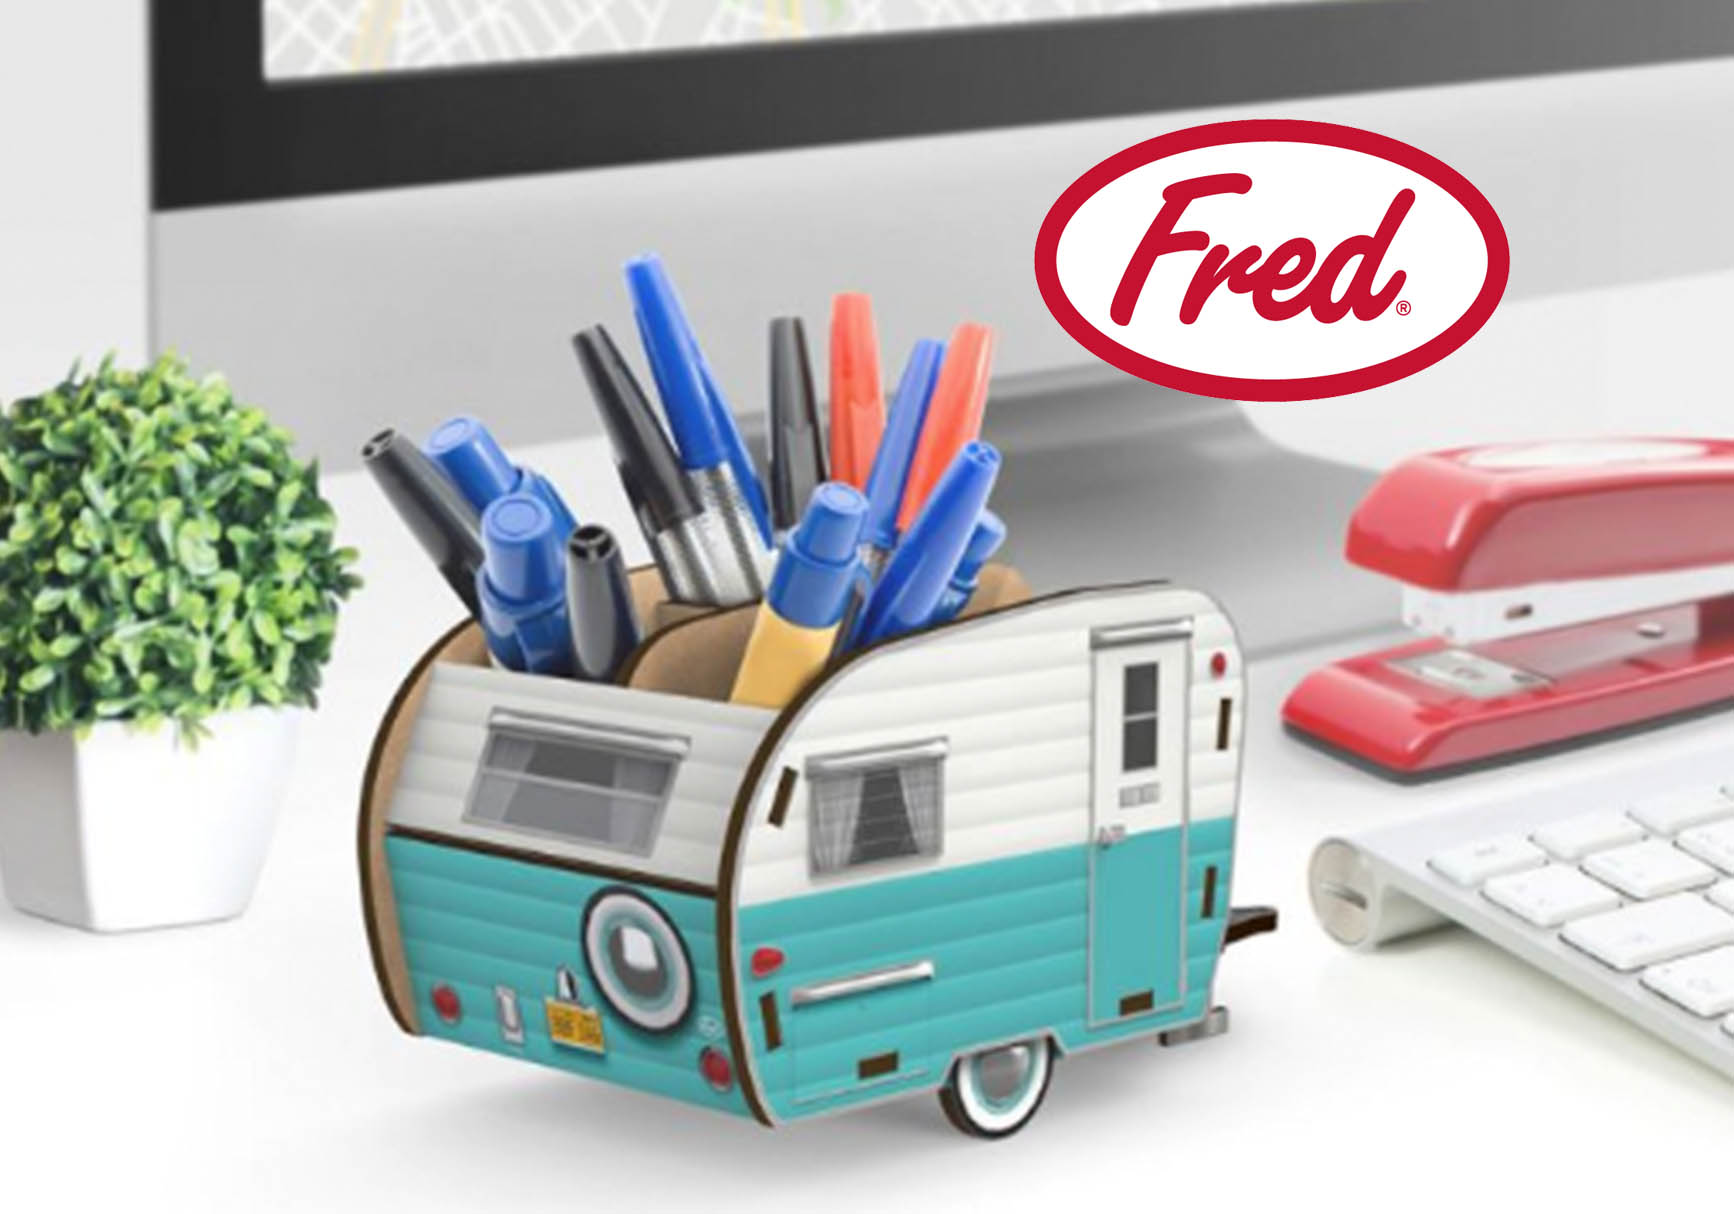 Fred - Whimsical Gifts and Gadgets – Mod Lounge Paper Company